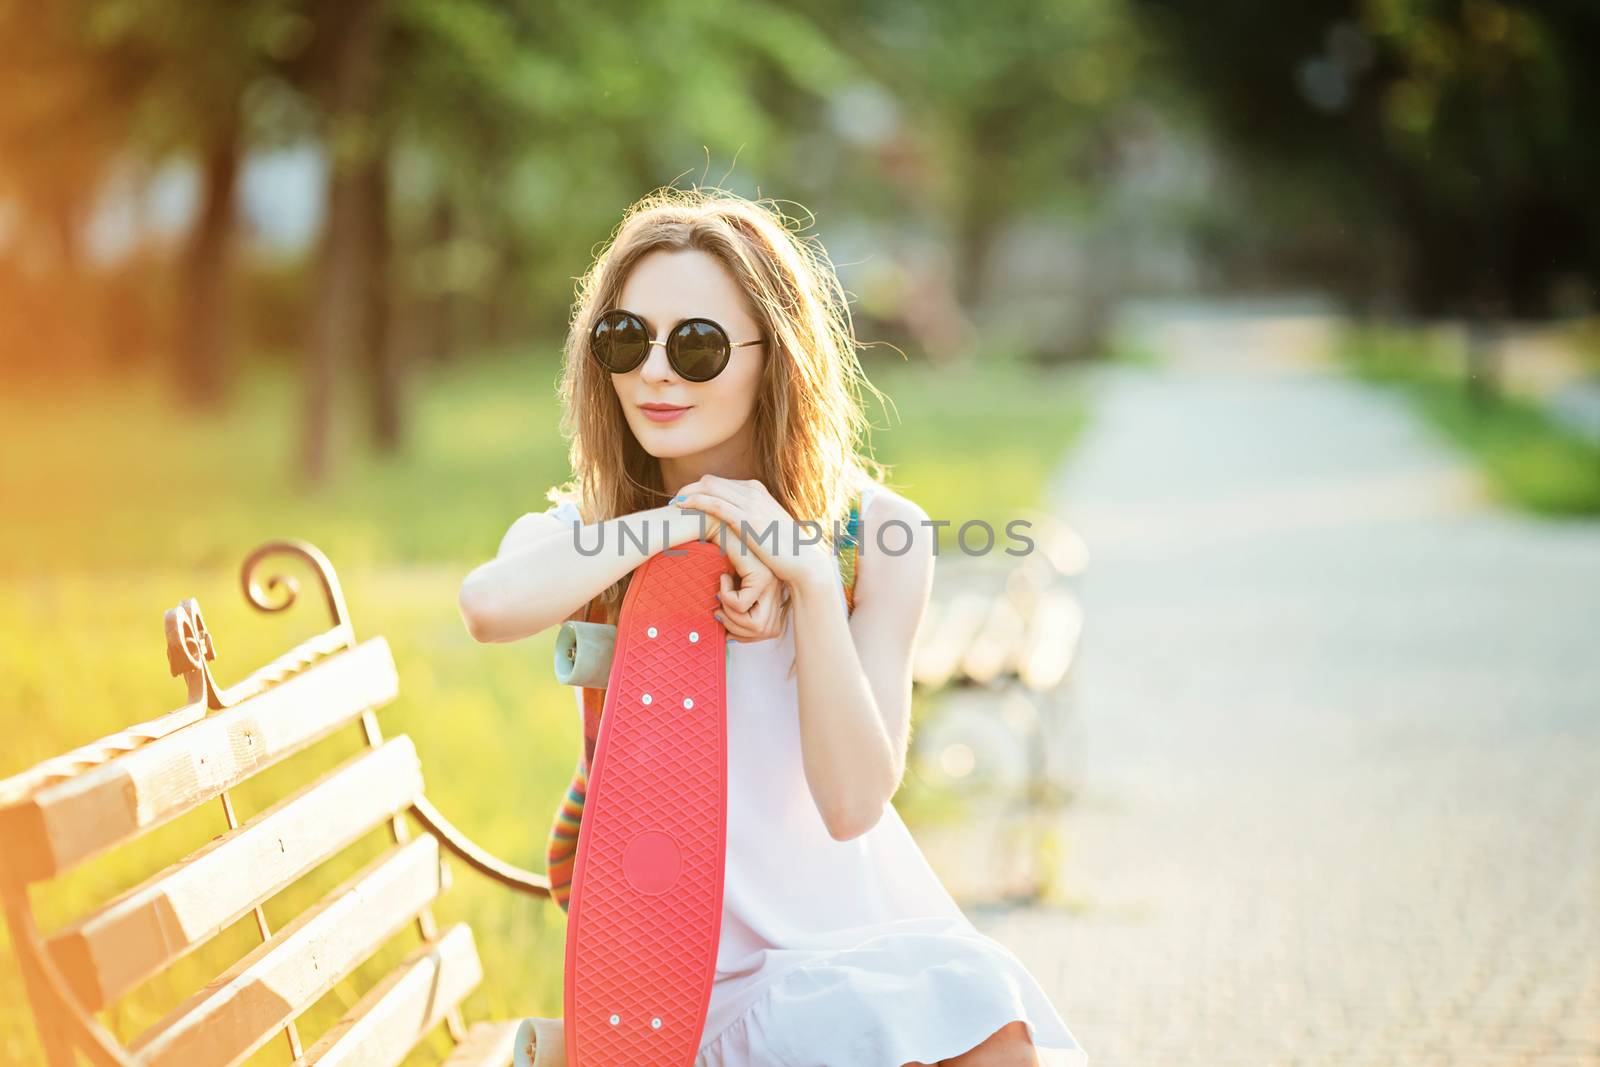 Lovely urban girl sitting on a bench in a city park. Portrait of a happy smiling young woman with a pink skateboard.